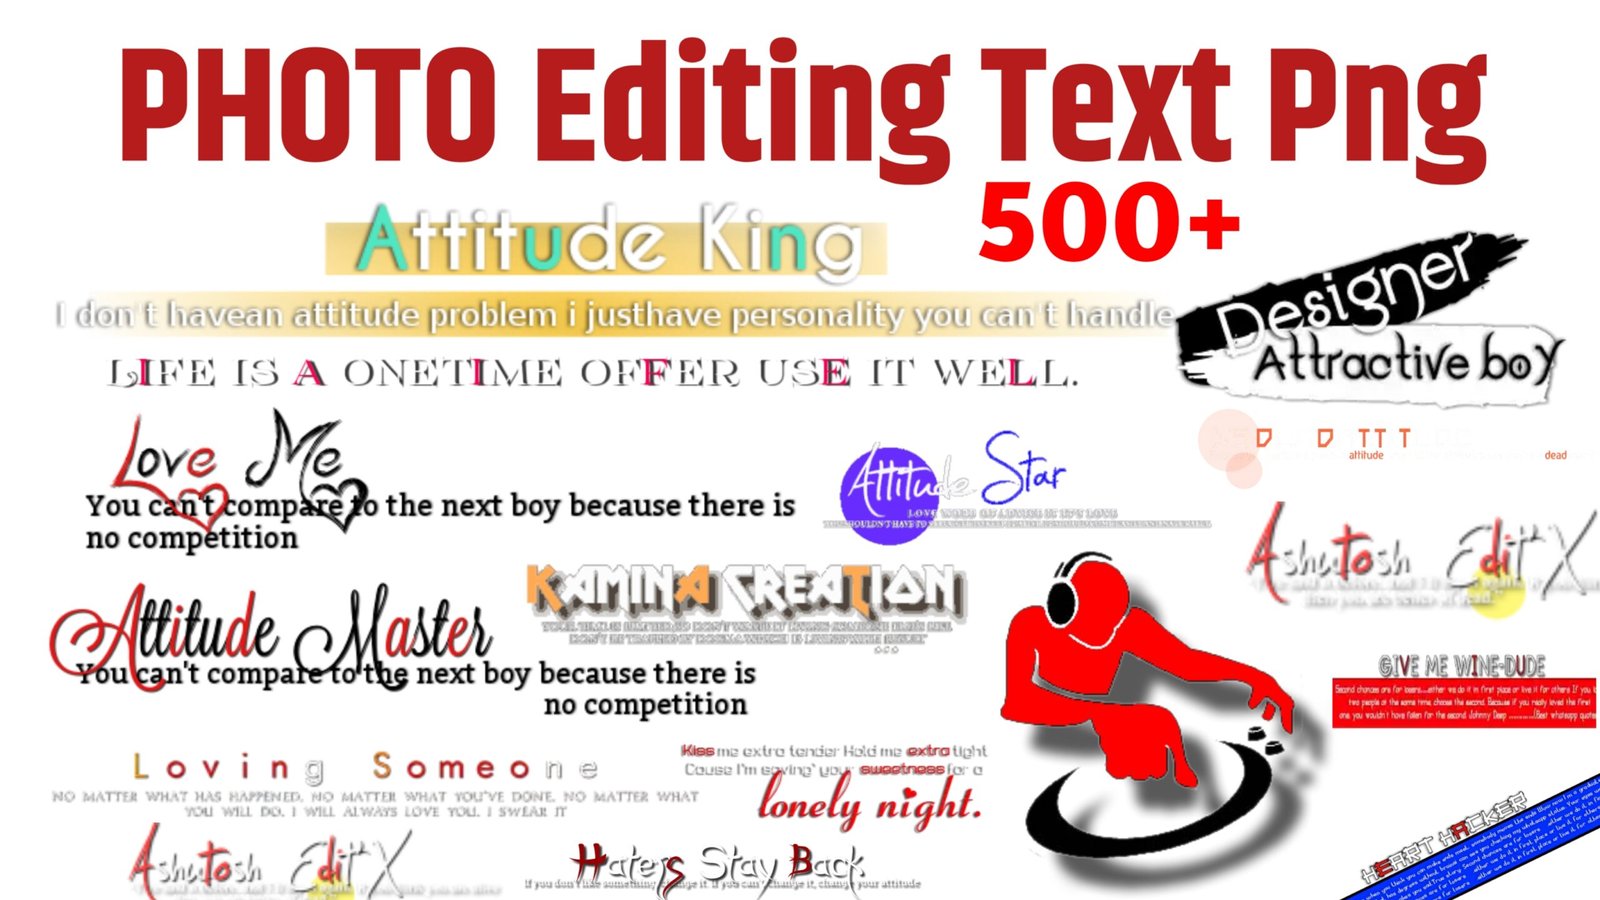 Text PNG photo editing images download free| text PNG PicsArt editing| zip file download